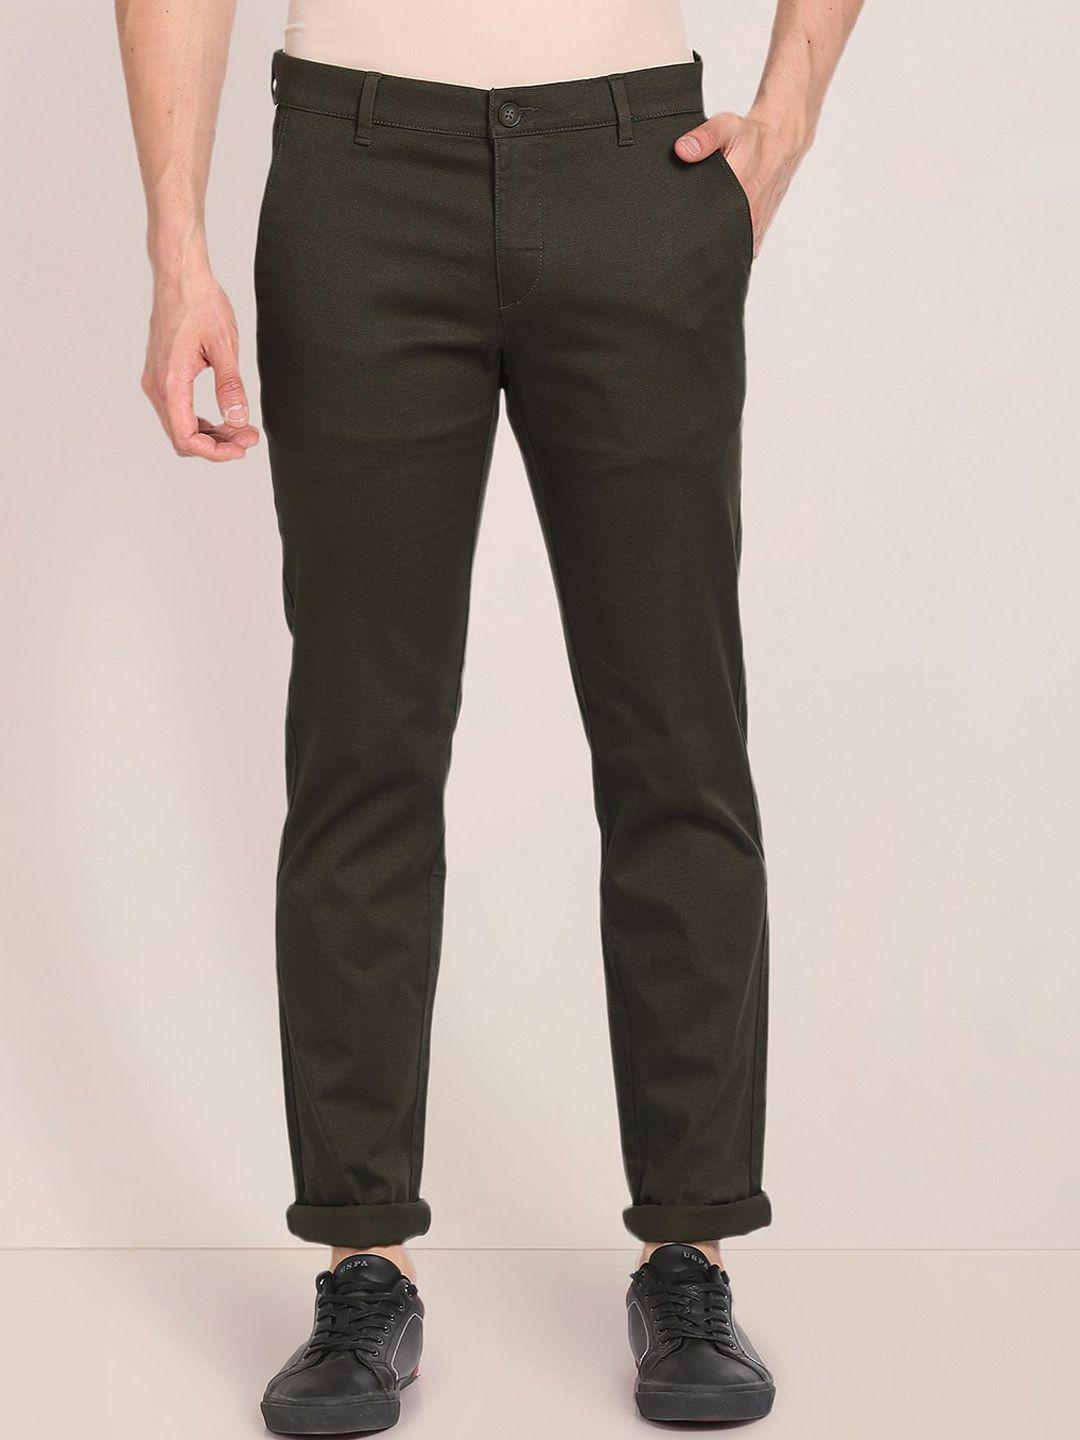 u-s-polo-assn-men-green-slim-fit-chinos-trousers